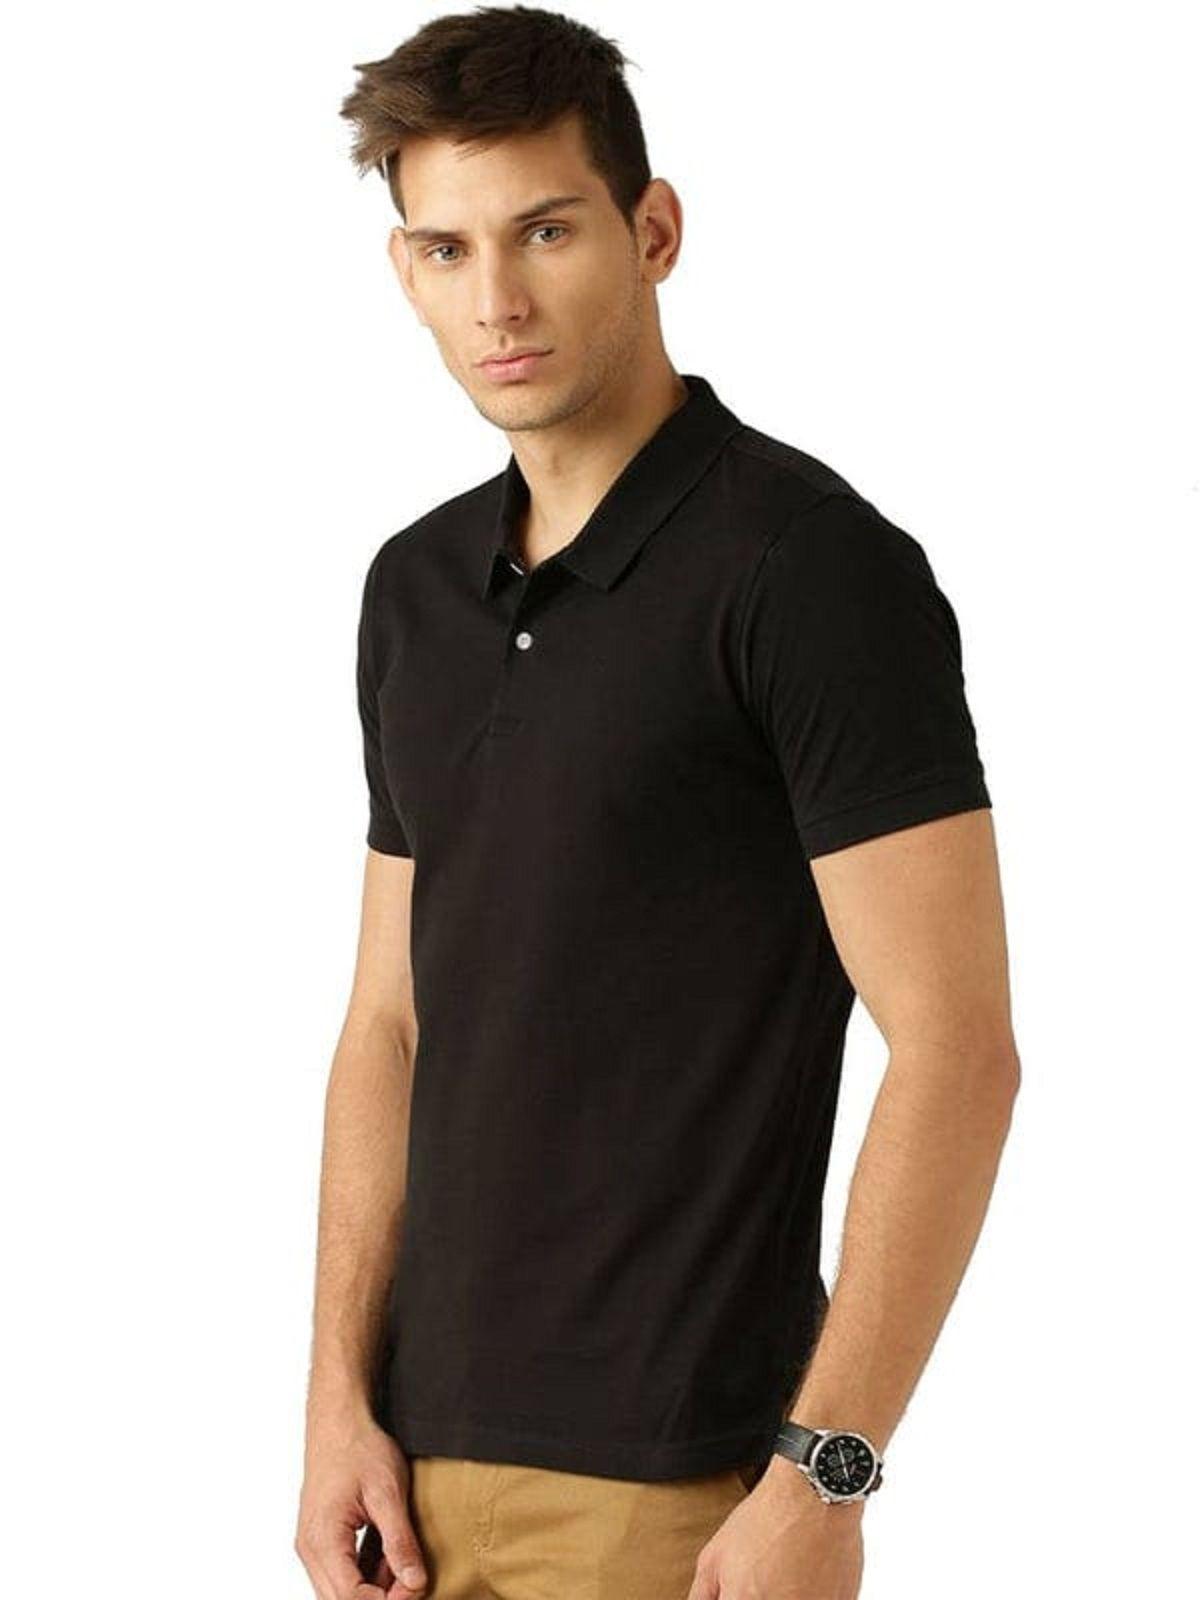 Men's Half Sleeves Polo Neck T-shirt (Pack of 4)